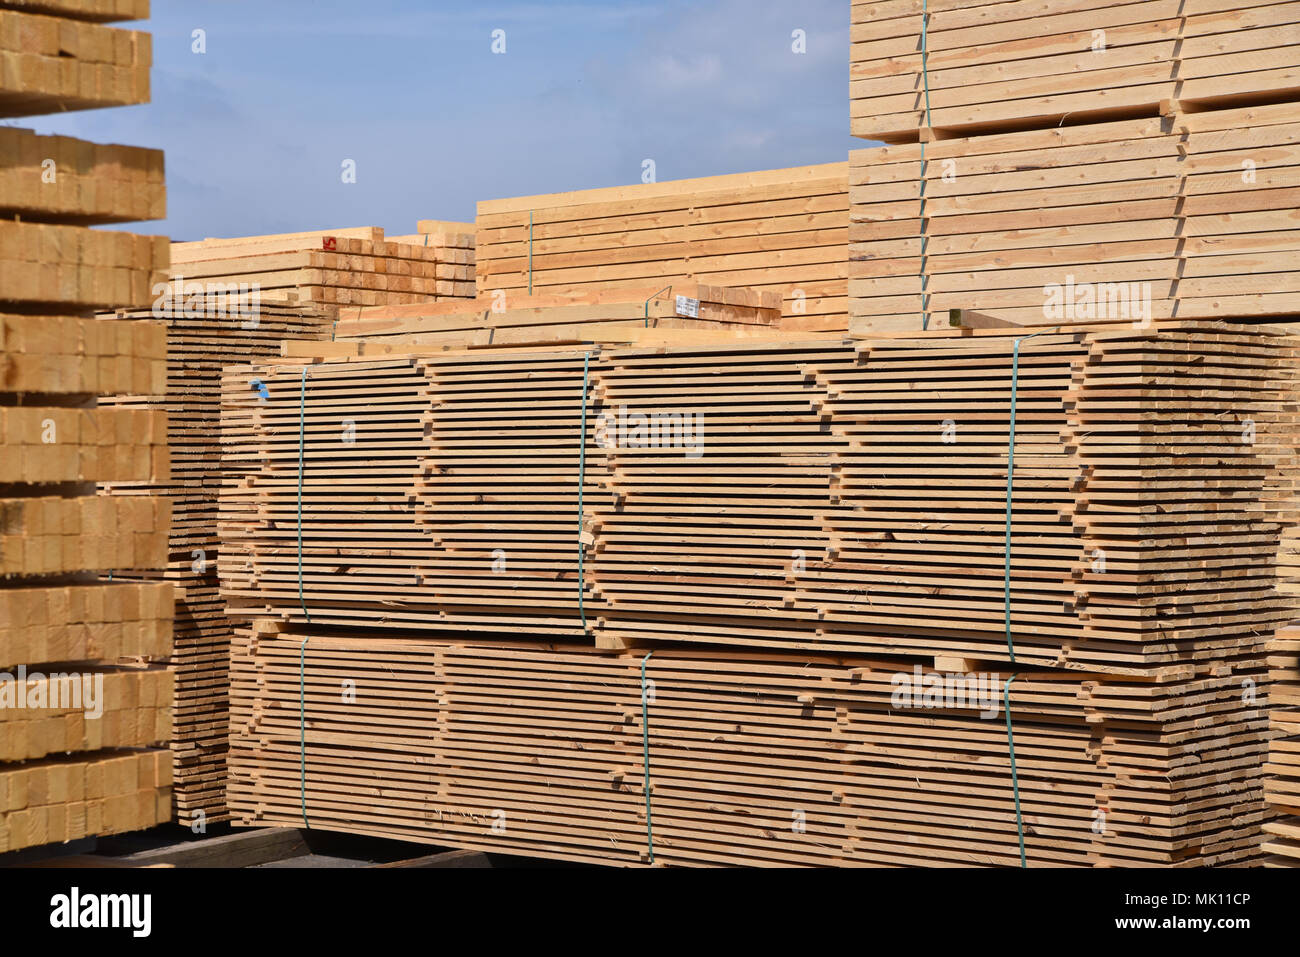 Industrial plant sawmill - storage of wooden boards Stock Photo